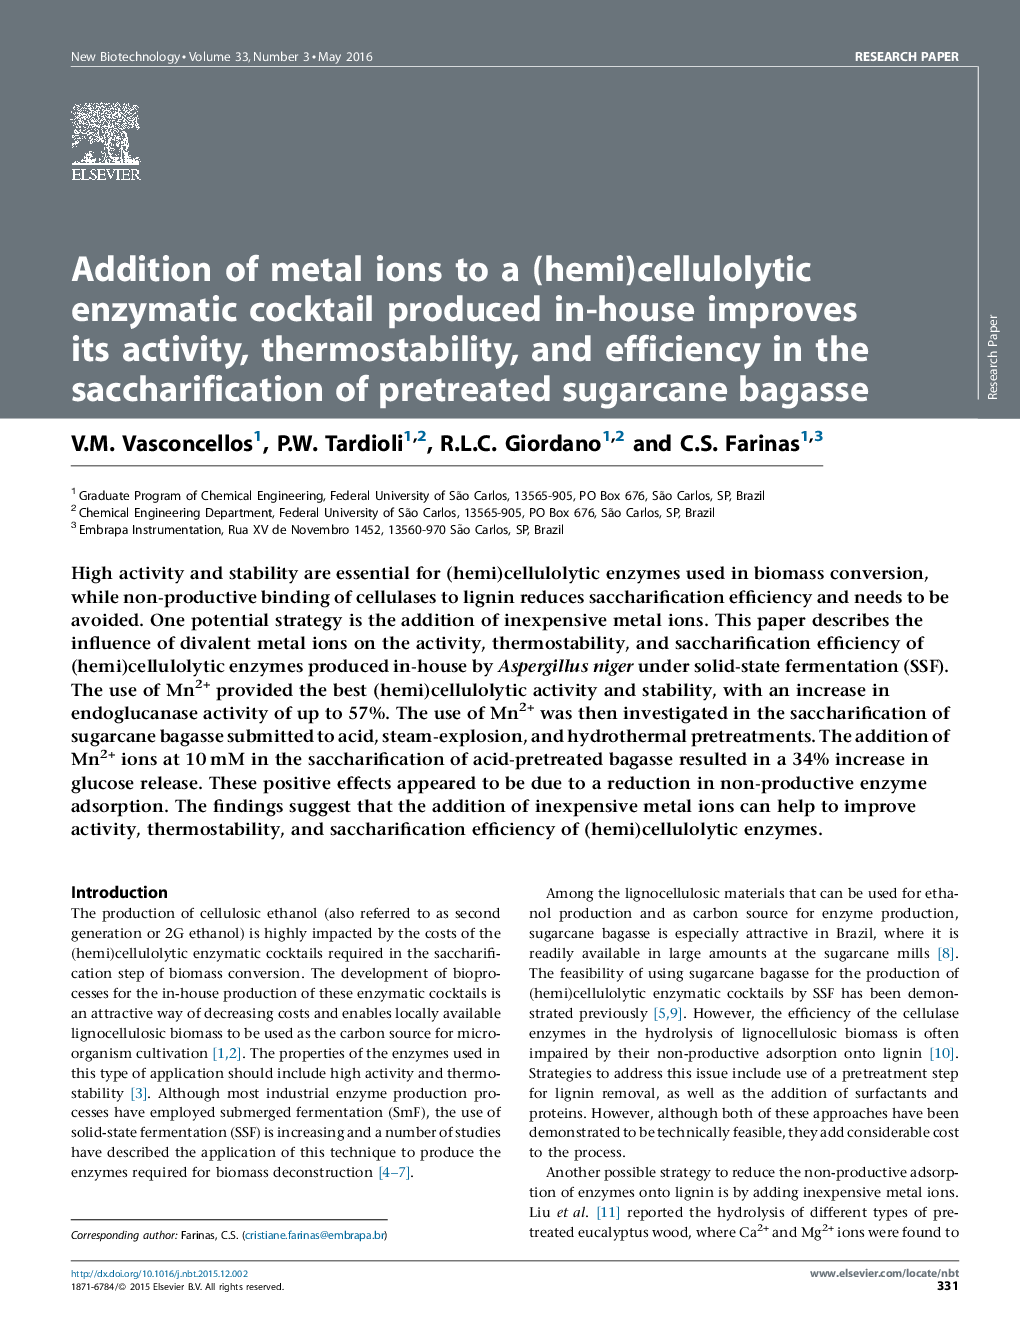 Addition of metal ions to a (hemi)cellulolytic enzymatic cocktail produced in-house improves its activity, thermostability, and efficiency in the saccharification of pretreated sugarcane bagasse